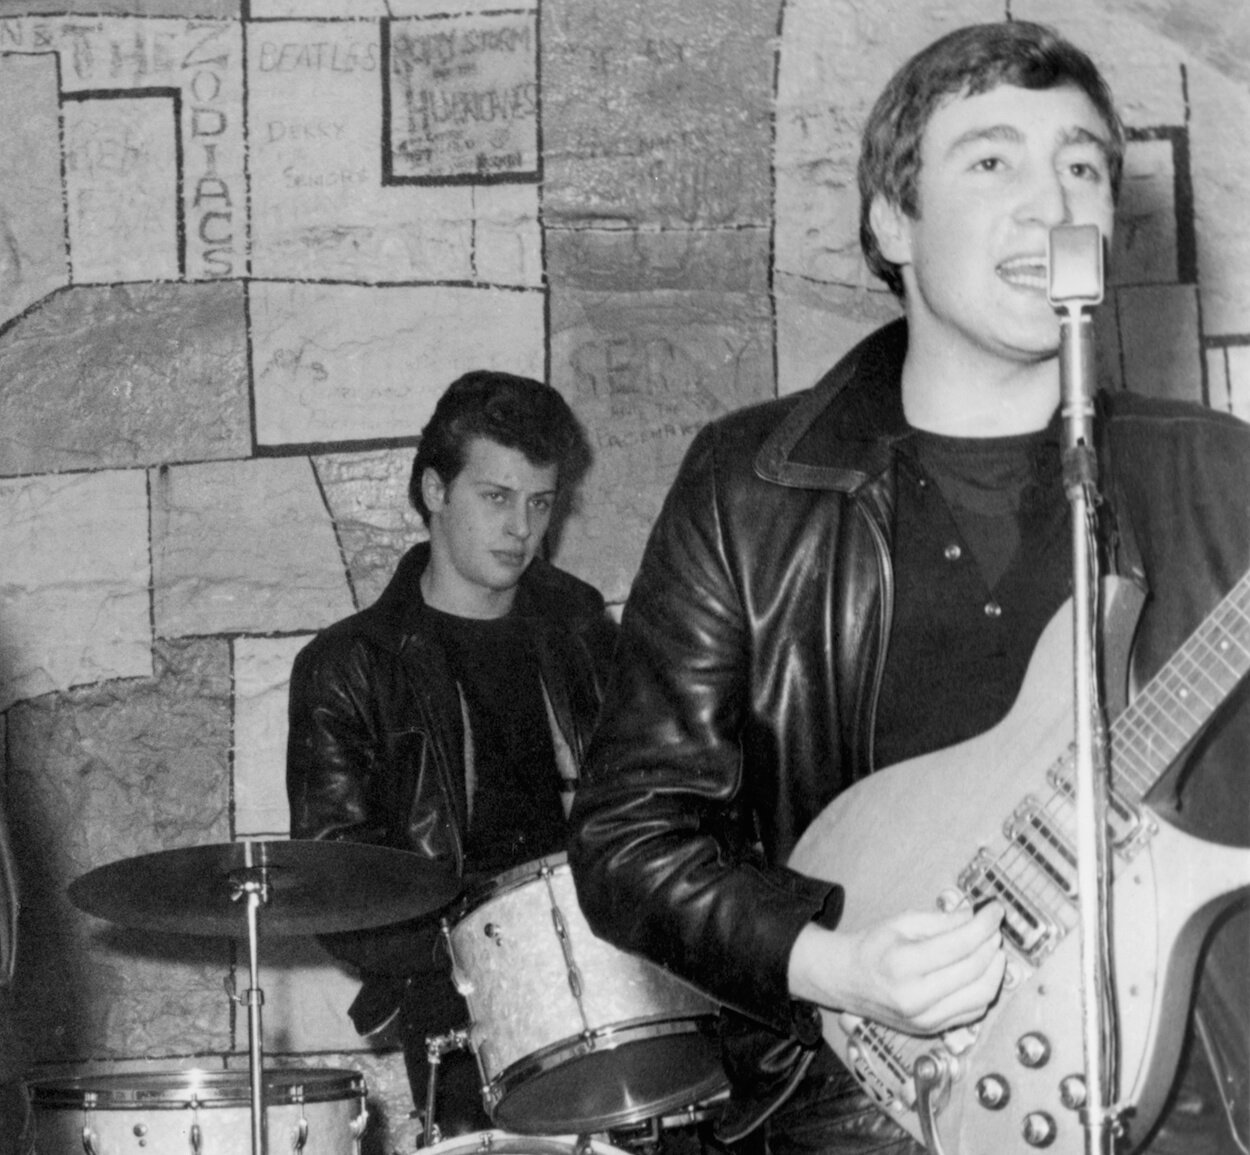 Pete Best (left, background) drumming while John Lennon sings and plays guitar at a 1961 Beatles concert.